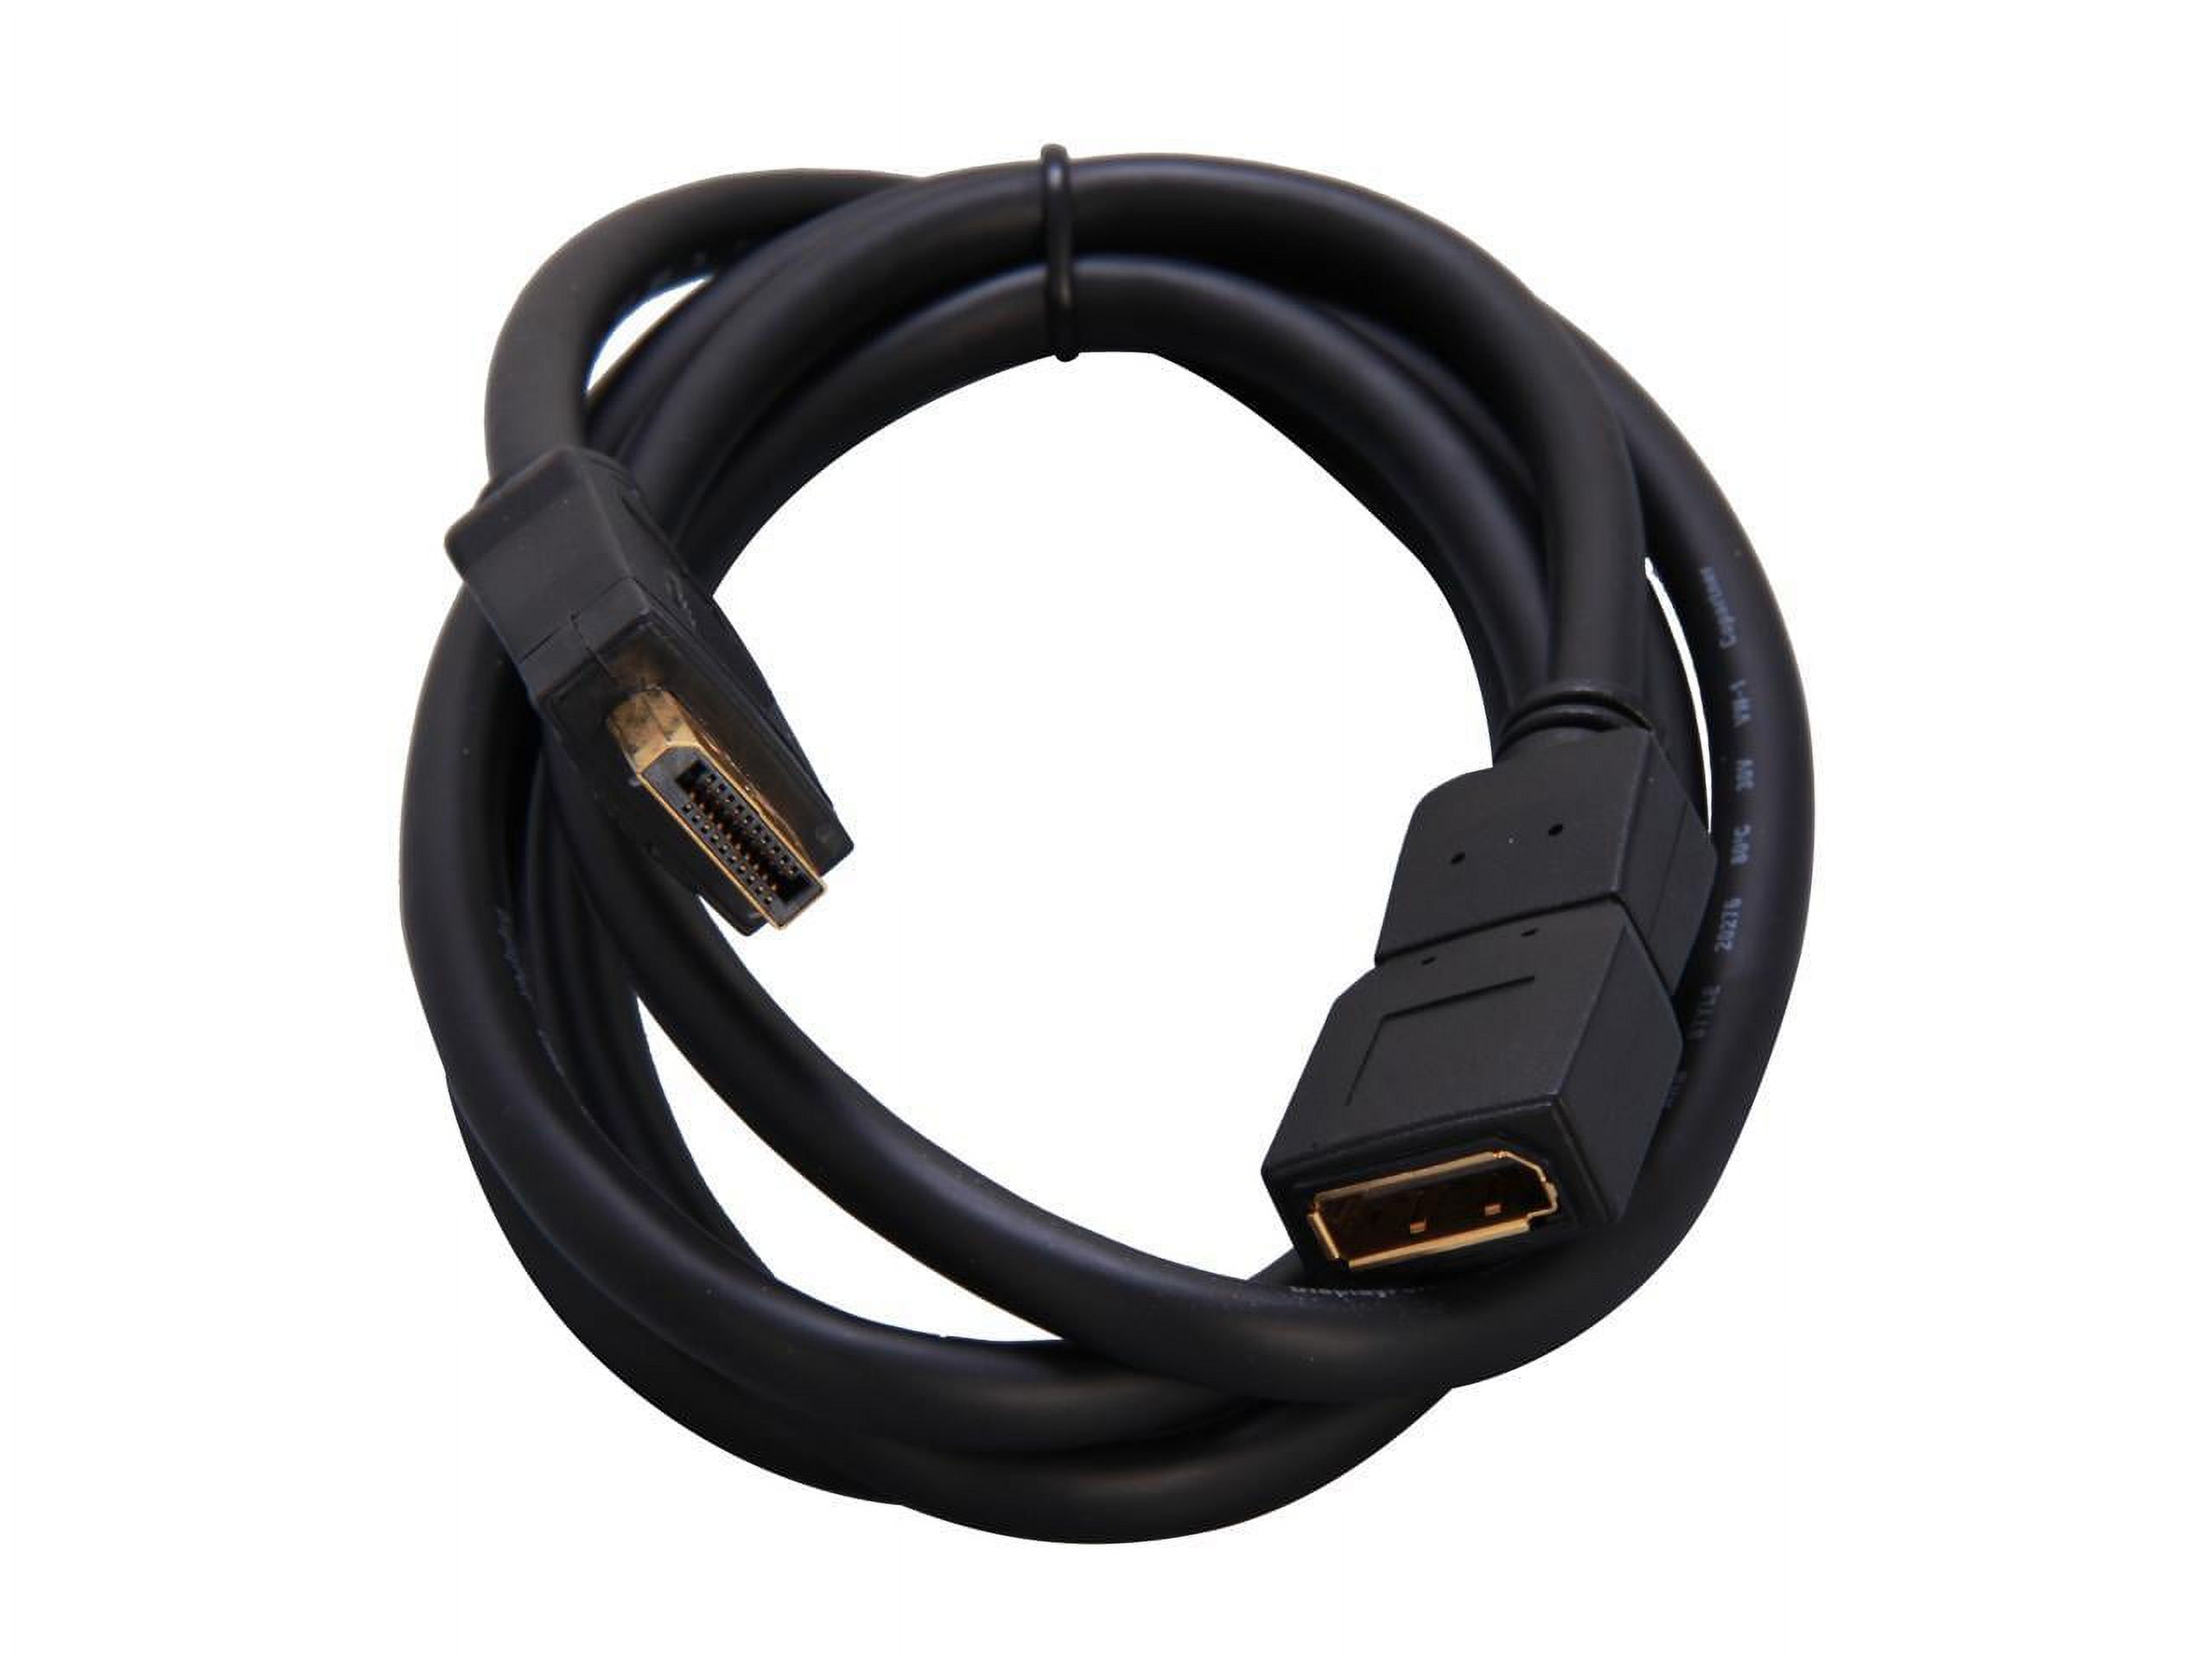 StarTech.com DPEXT6L 6 ft. Black Connector A: 1 - DisplayPort (20 pin; Latching) Male
Connector B: 1 - DisplayPort (20 pin) Female DisplayPort Video Extension Cable Male to Female - image 2 of 3